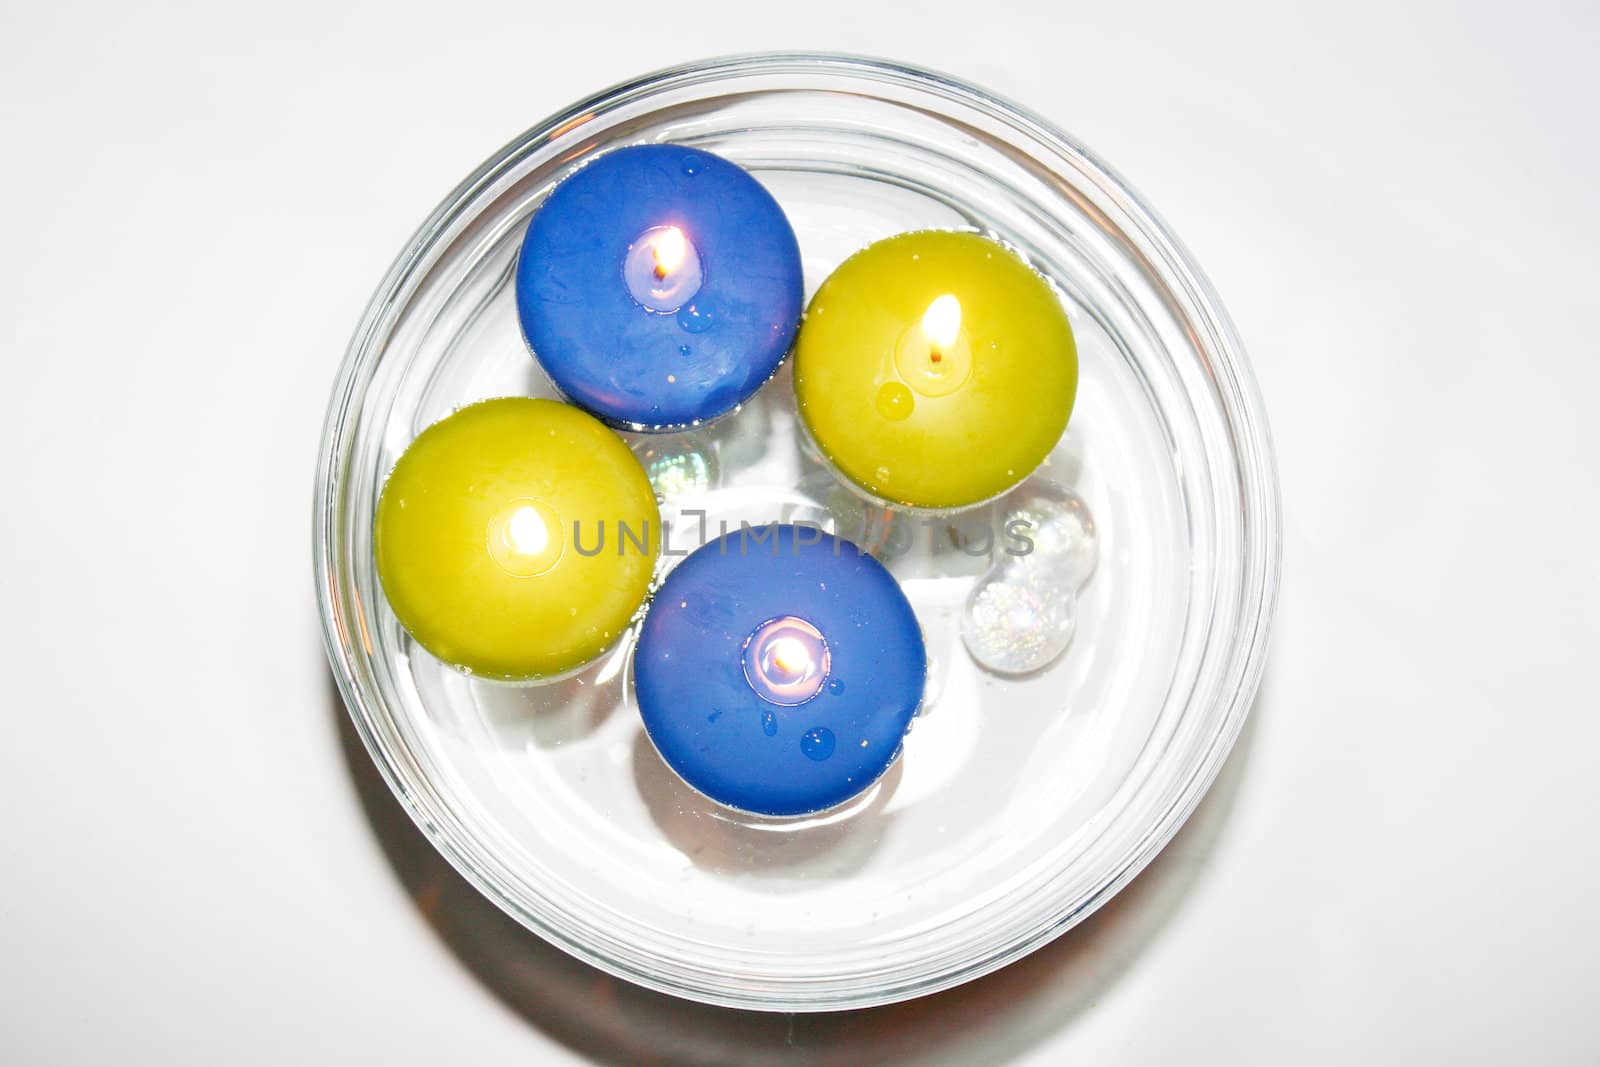 Colored folating candles on water with water drops